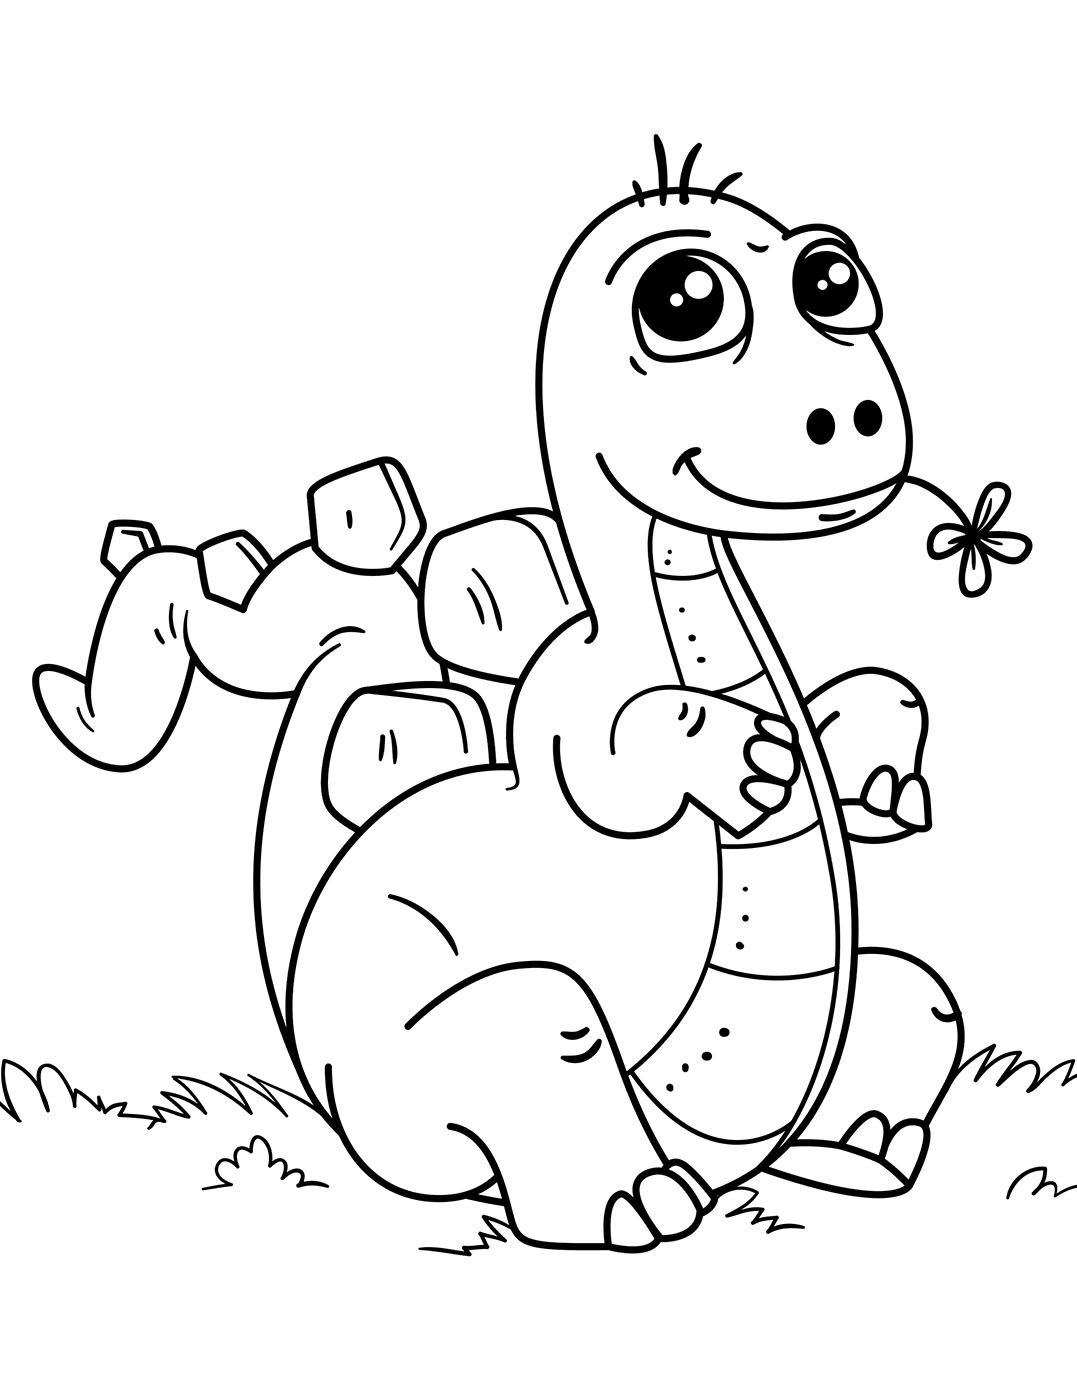 little-tyrannosaurus-rex-dinosaurs-kids-coloring-pages